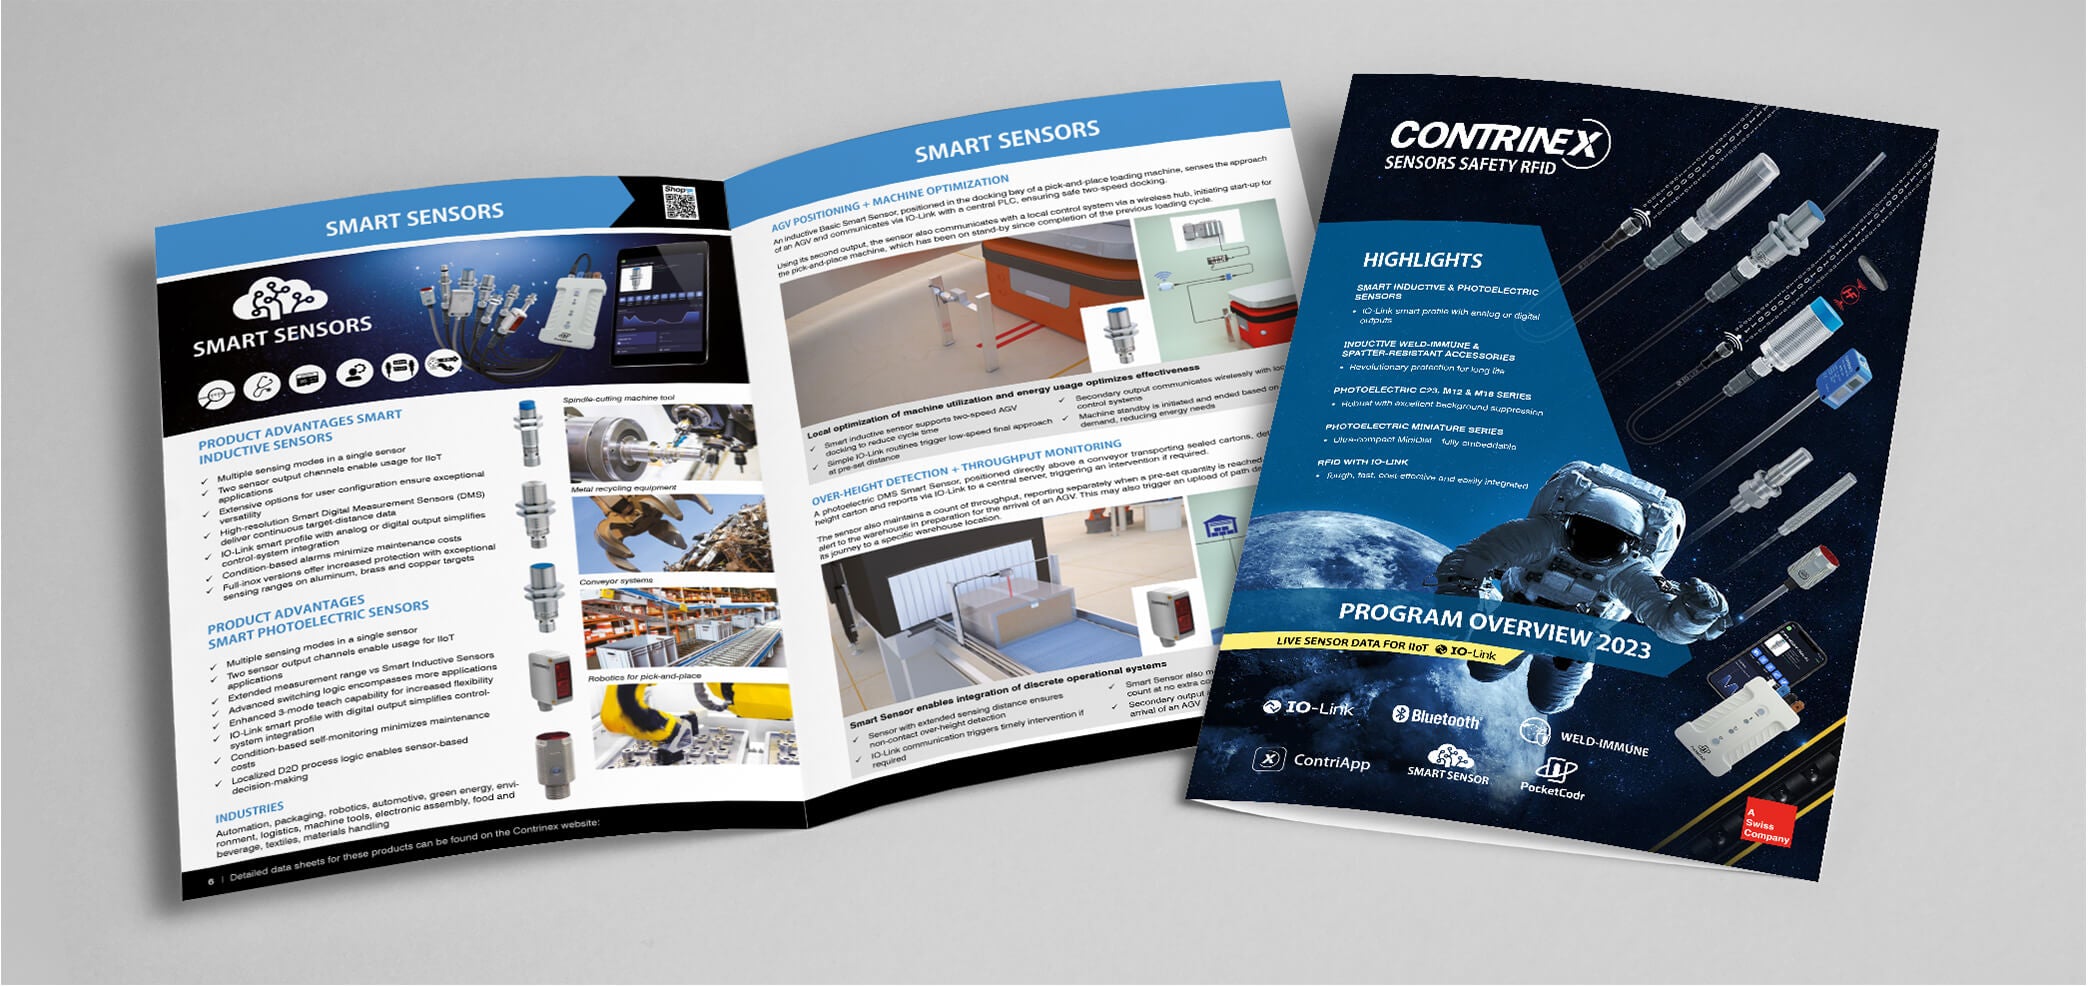 Download your guide to Contrinex products!